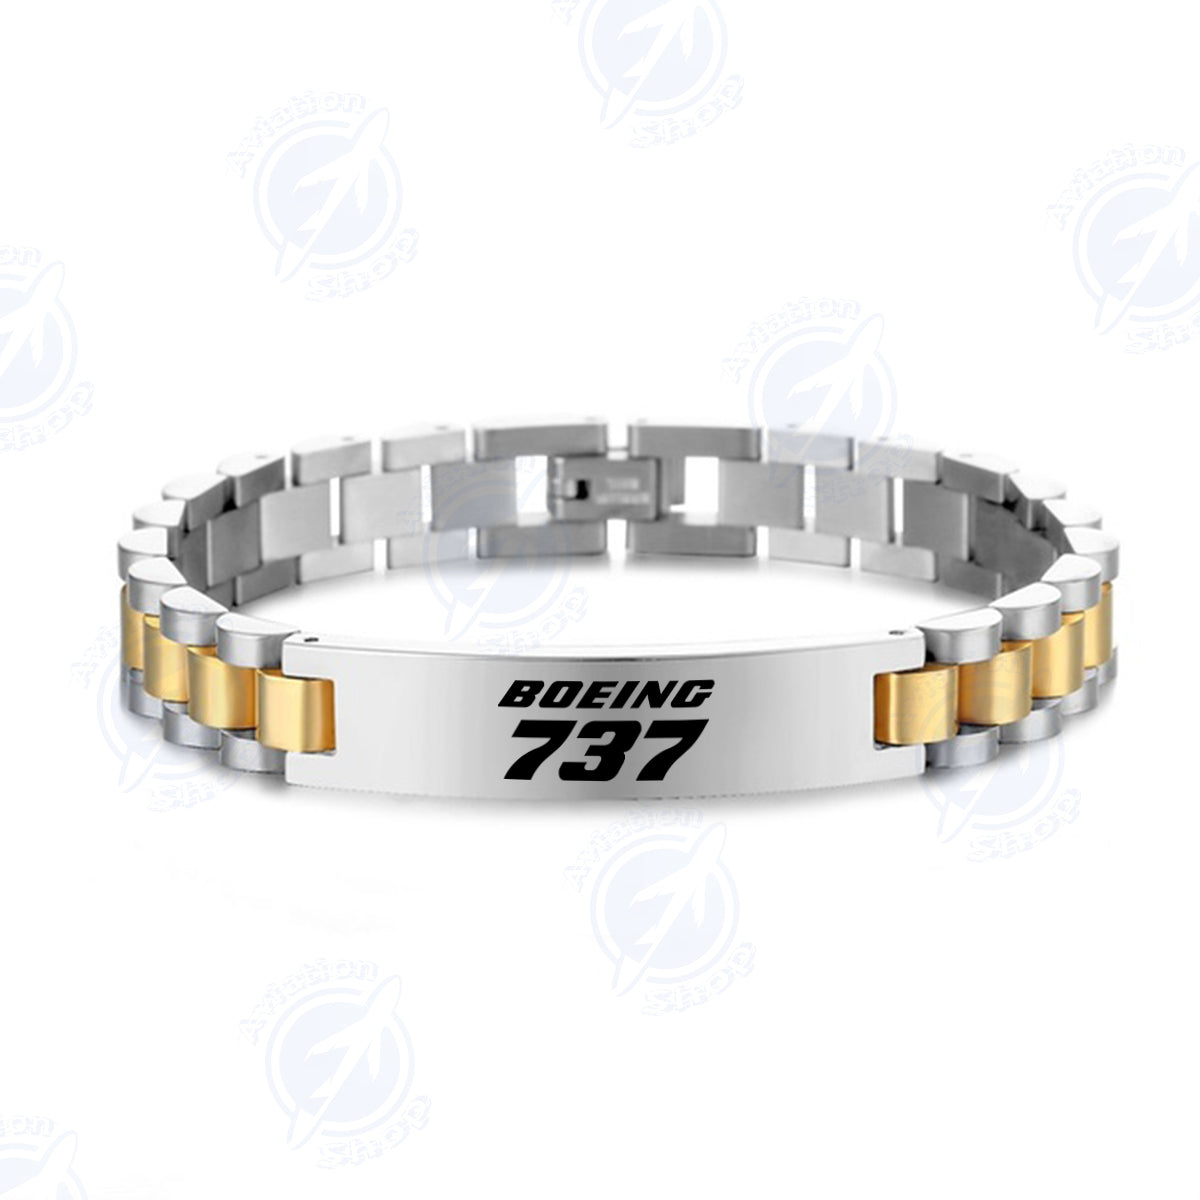 Boeing 737 & Text Designed Stainless Steel Chain Bracelets